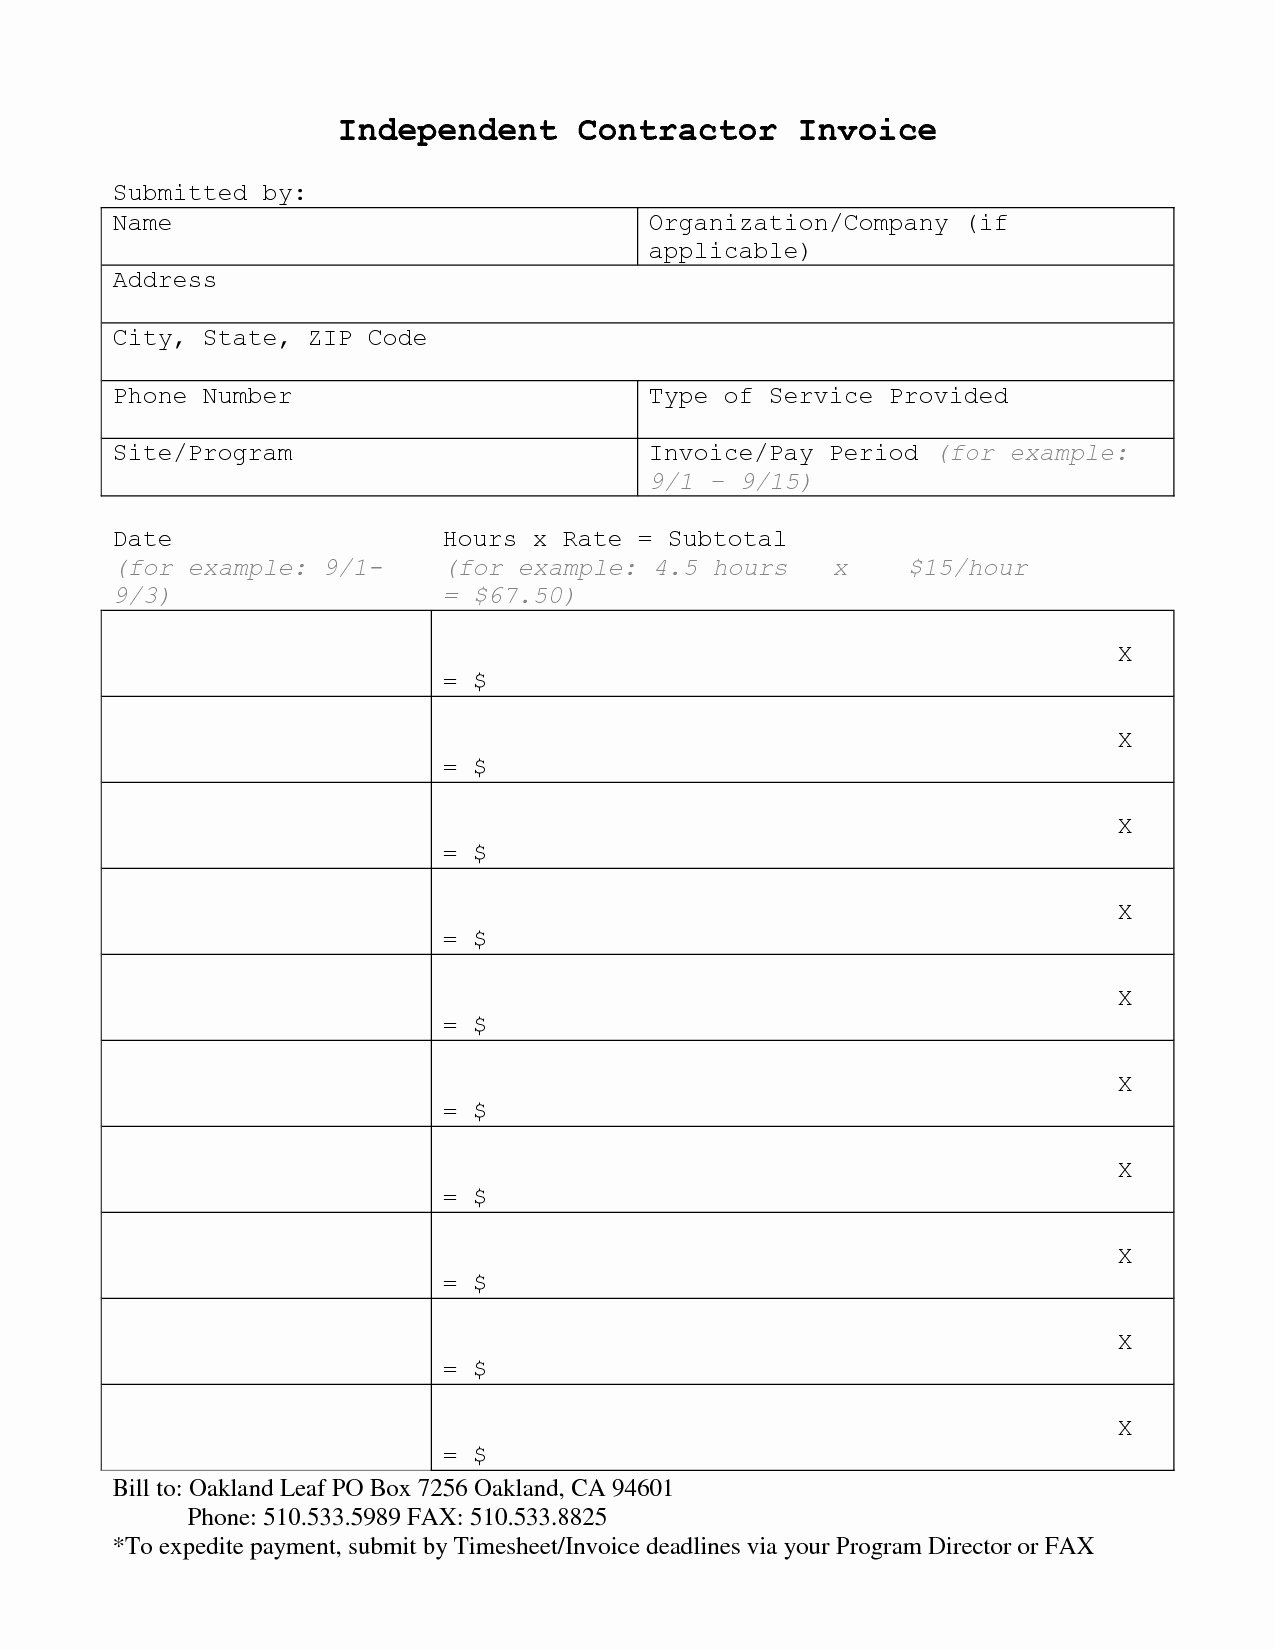 Independent Contractor Invoice Template Fresh Independent Contractor Invoice Template